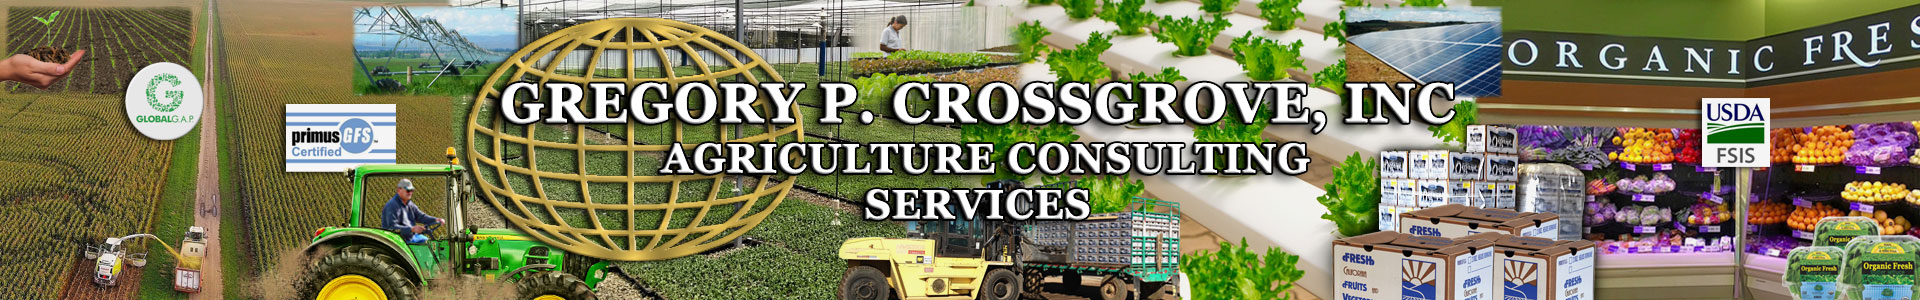 Greg Crossgrove Agriculture Consulting